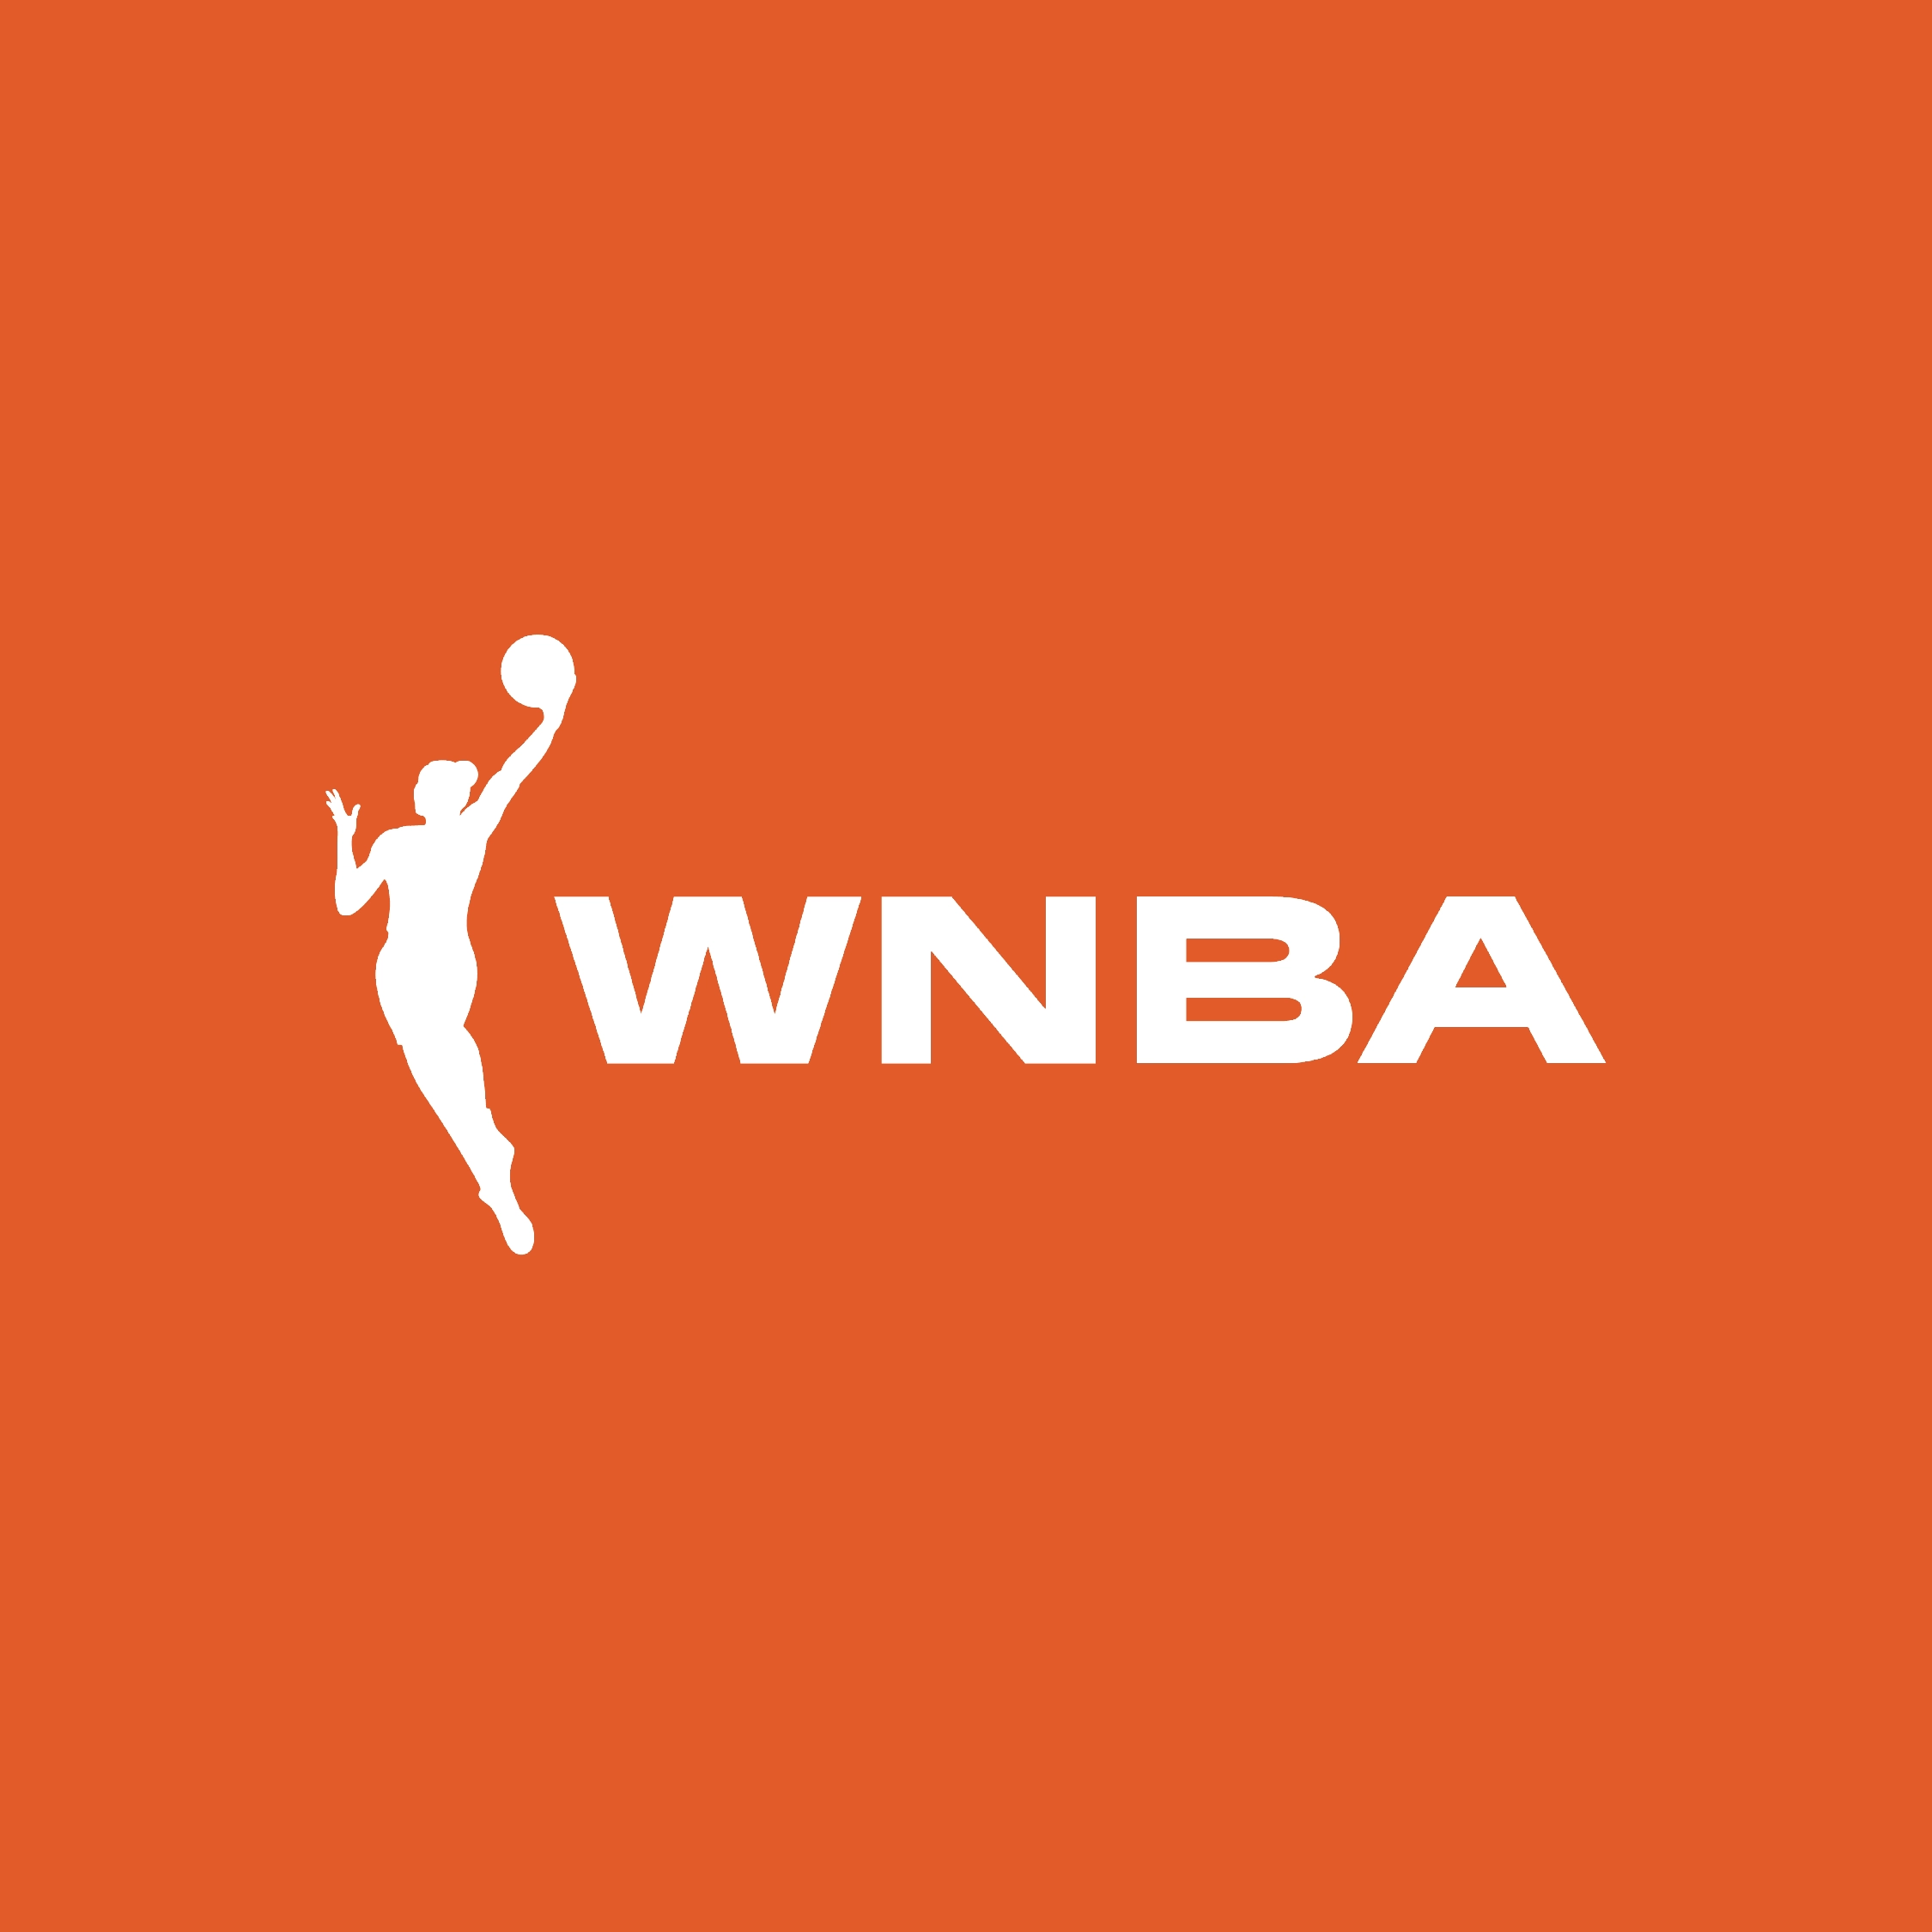 Moving sport forward with the WNBA